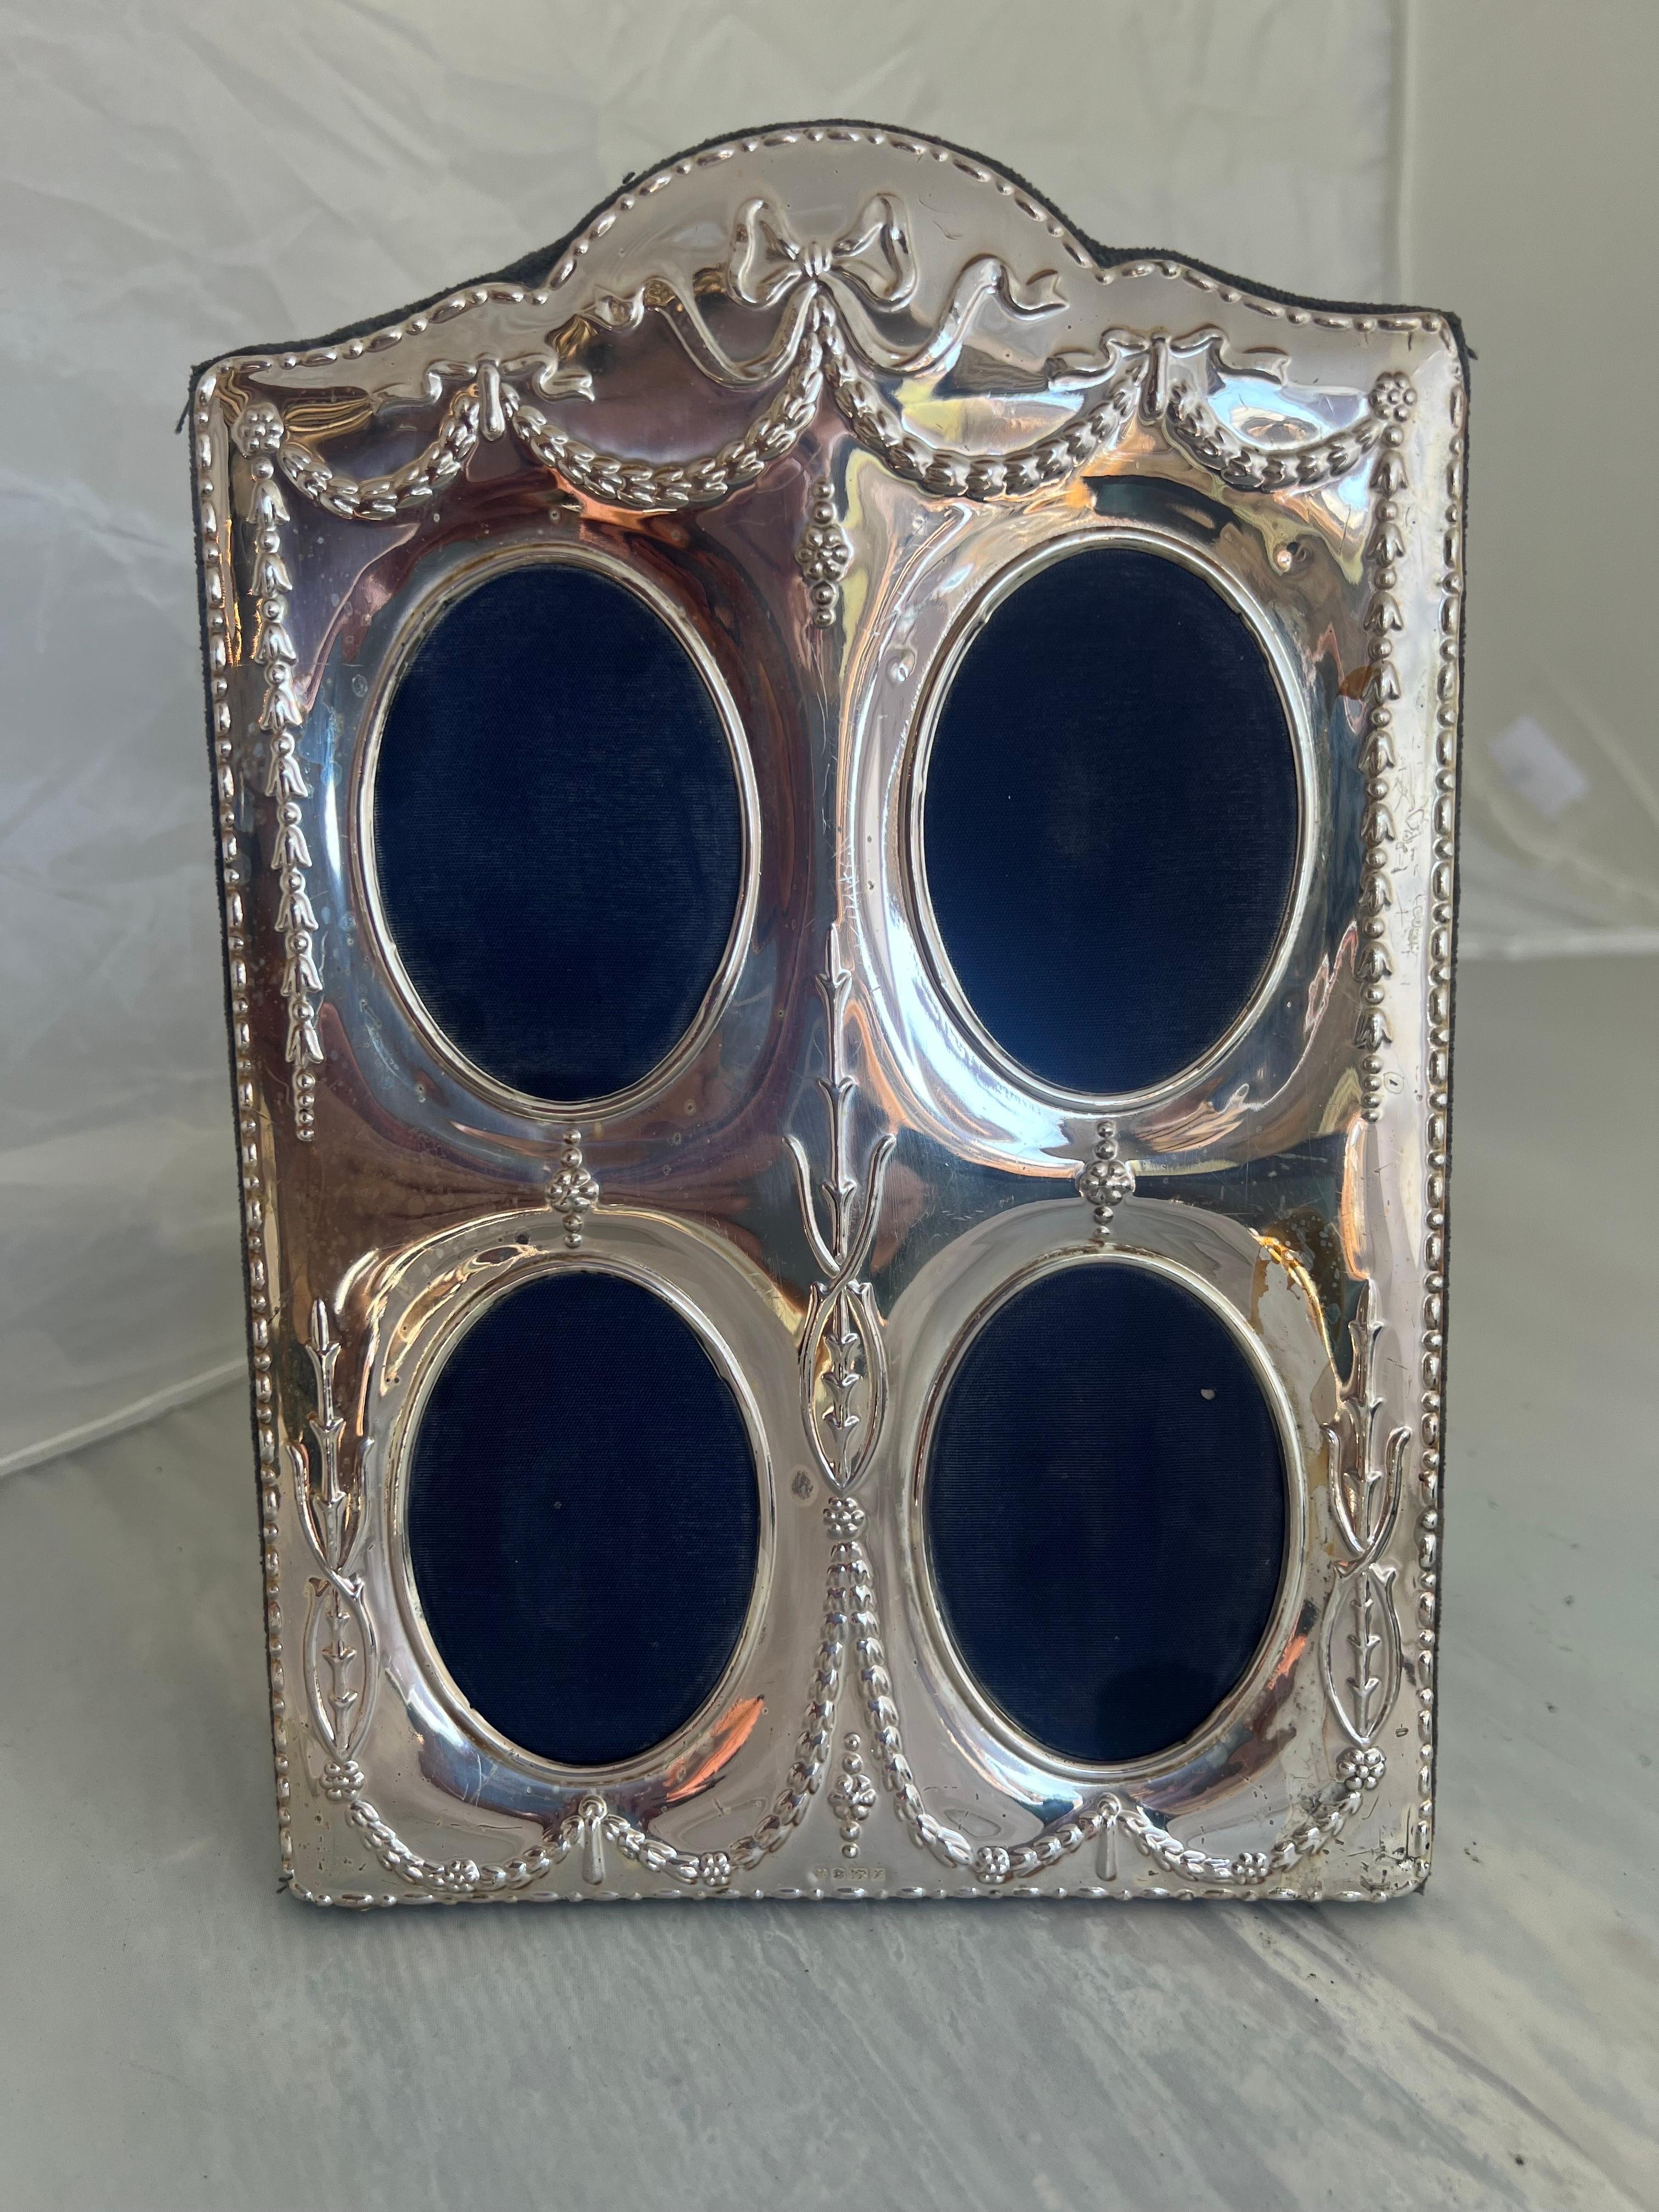 A beautiful sterling silver picture frame crafted by Carrs LTD in England is a timeless and elegant piece.  Carrs in known for producting high-quality silverware, and such a frame would undoubtedly add a touch of sophistication to any cherished